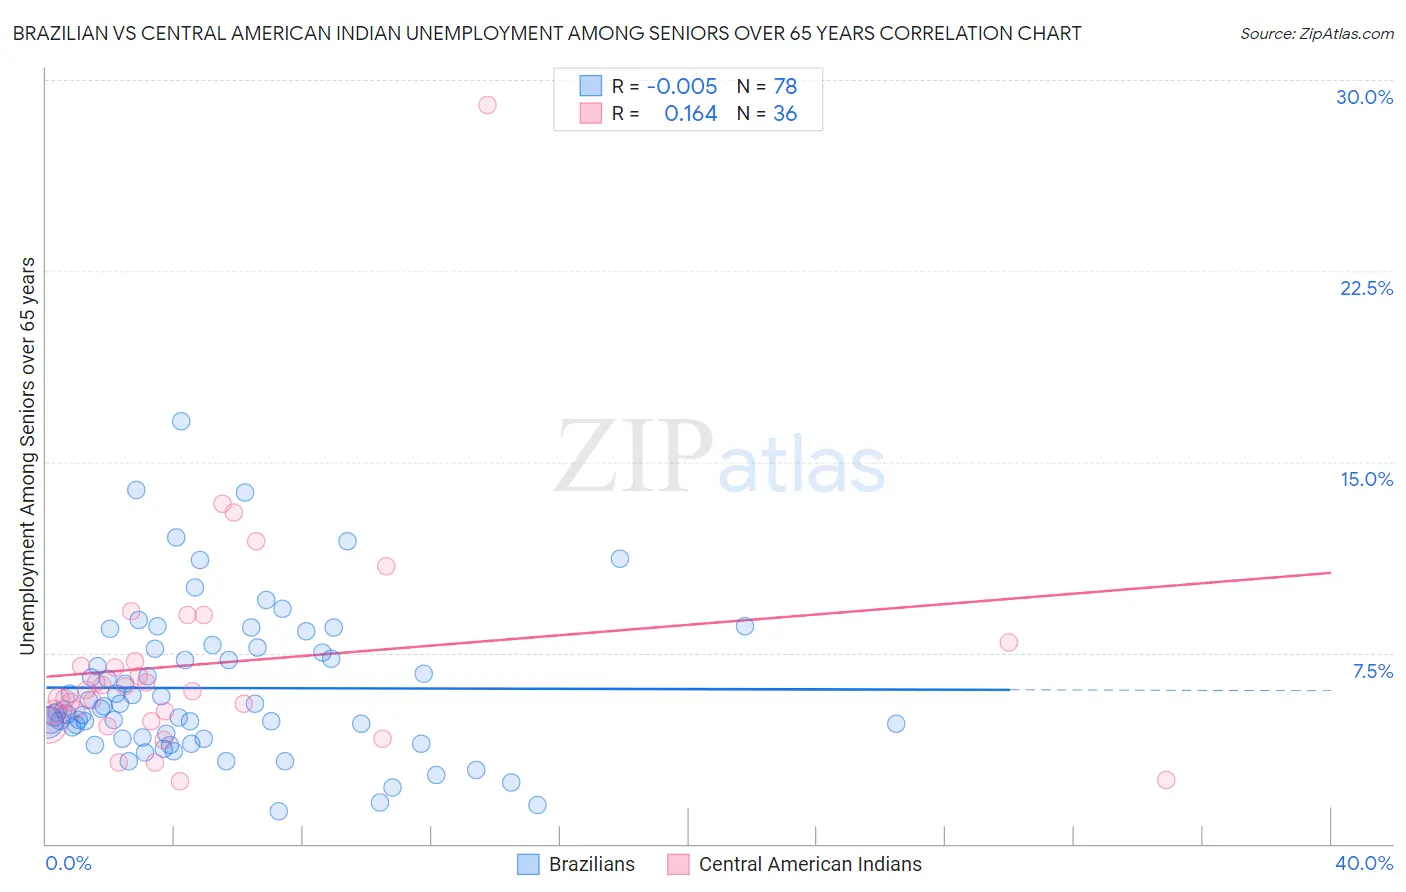 Brazilian vs Central American Indian Unemployment Among Seniors over 65 years